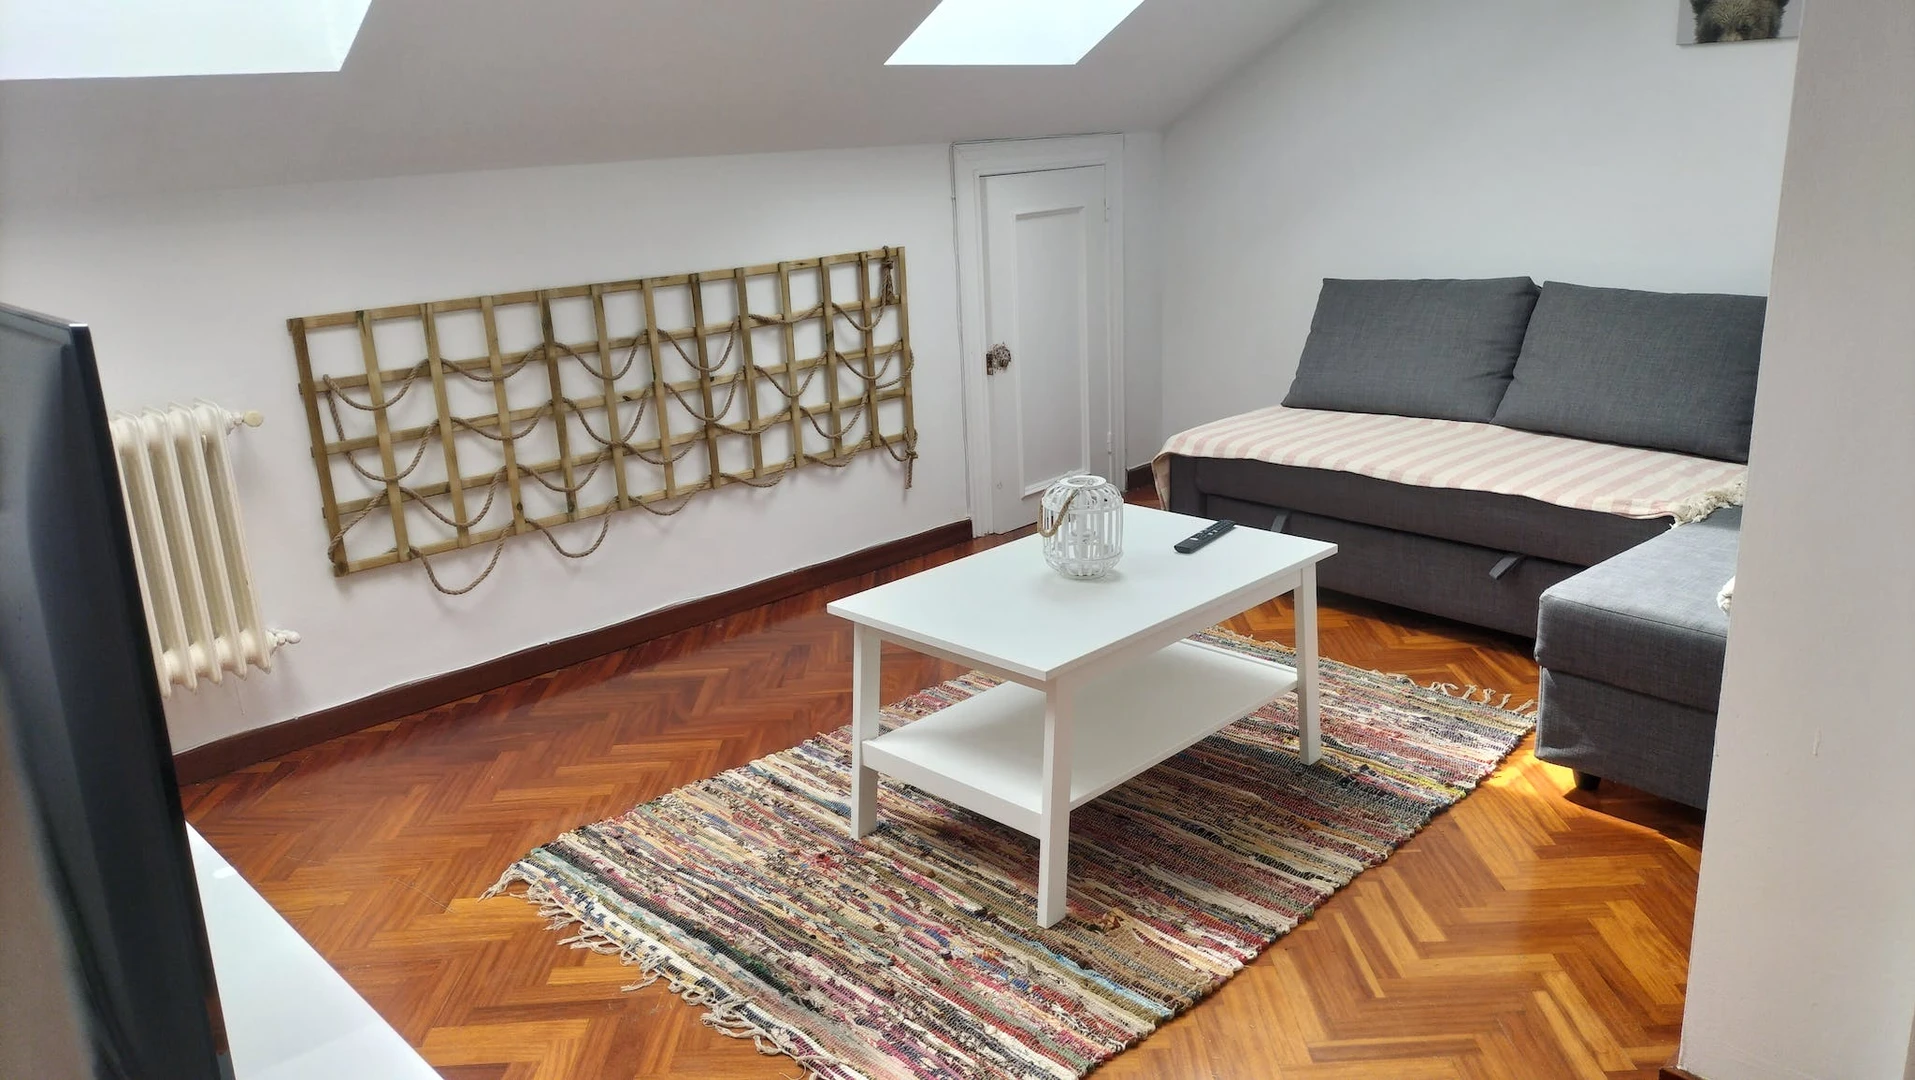 Room for rent in a shared flat in gijon